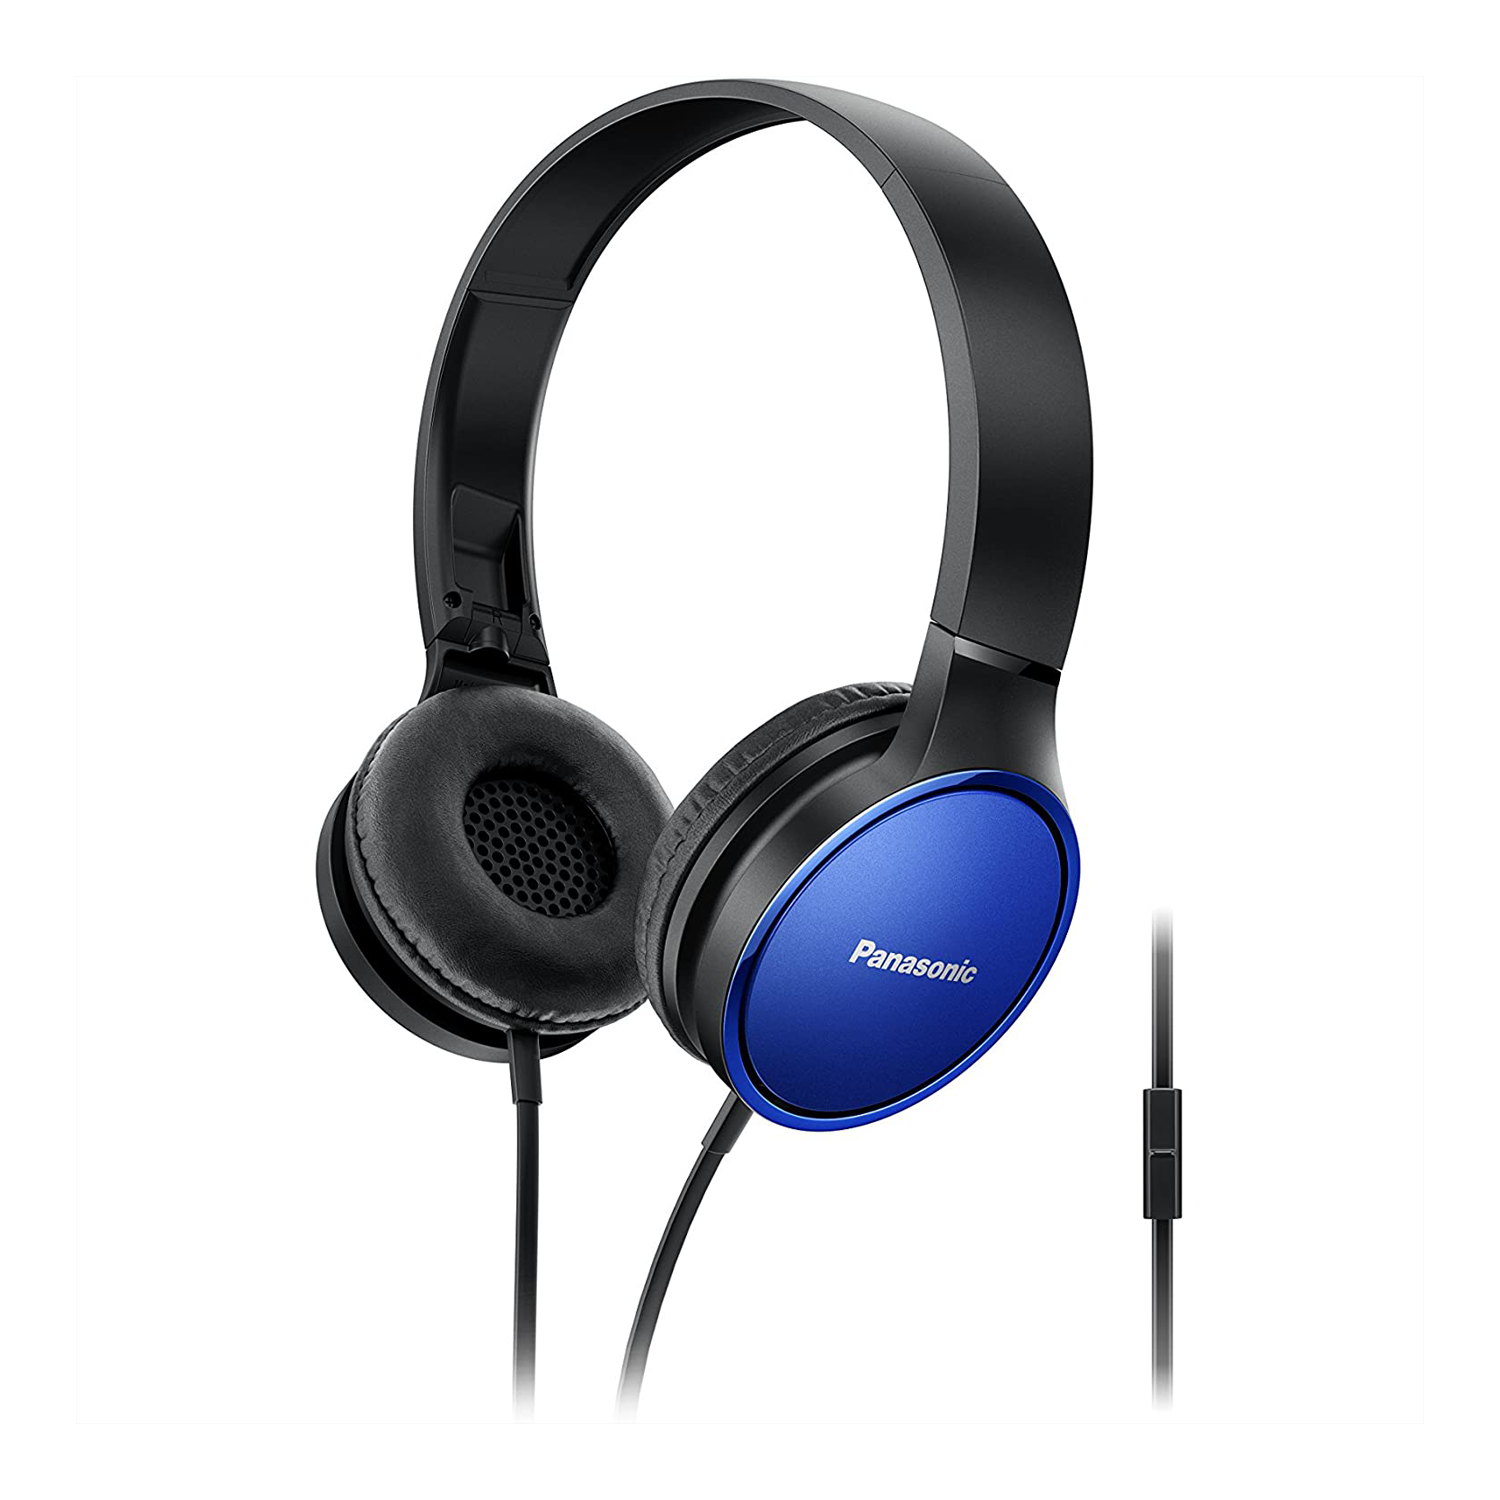 Panasonic Premium Sound On Ear Stereo Headphones RP-HF300M with Integrated Mic and Controller  - Blue